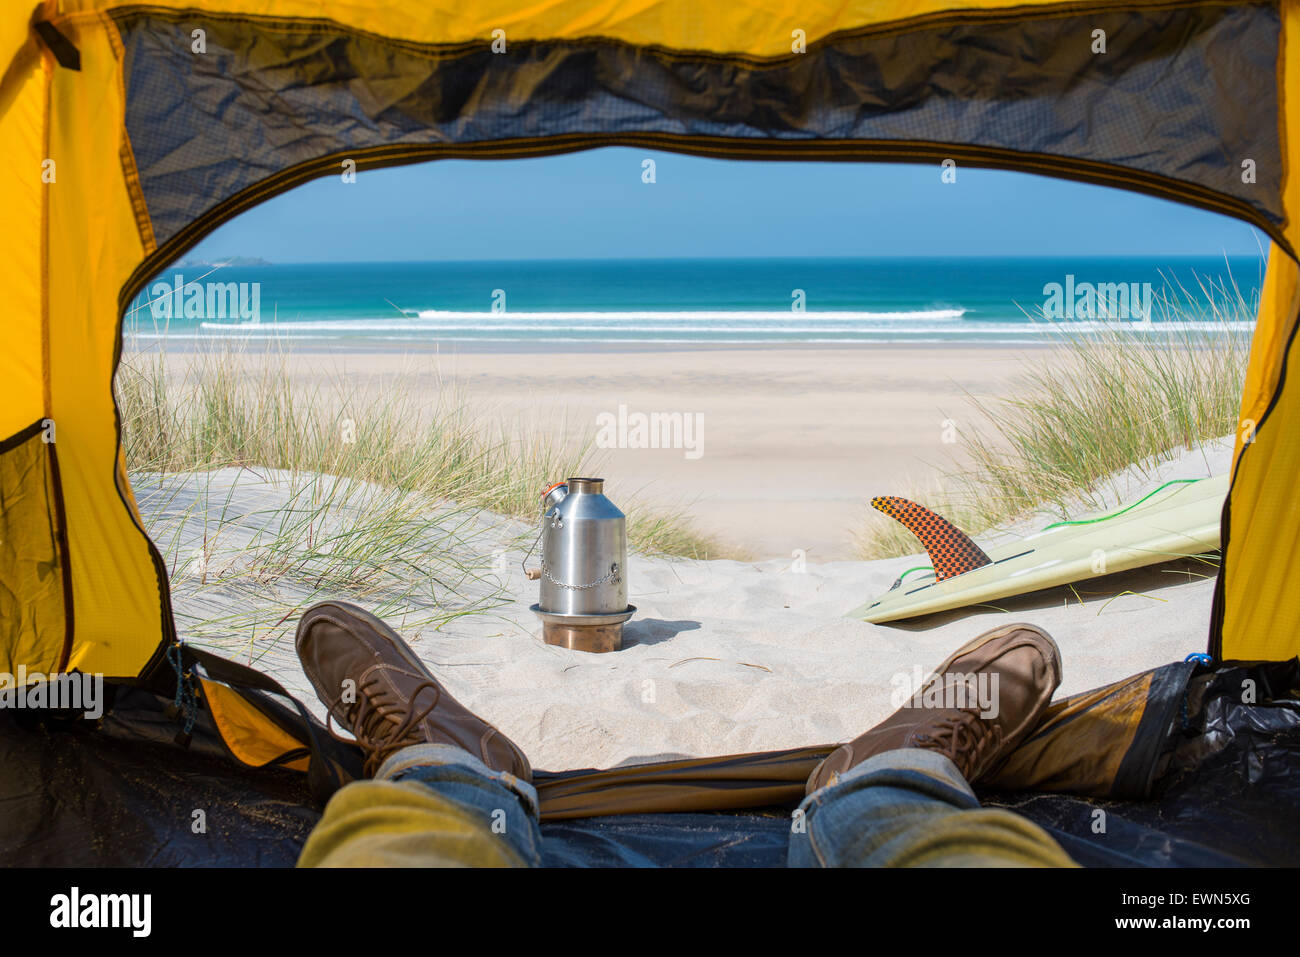 View from a tent on the beach with a surfboard, stove and the sea in the distance. Stock Photo